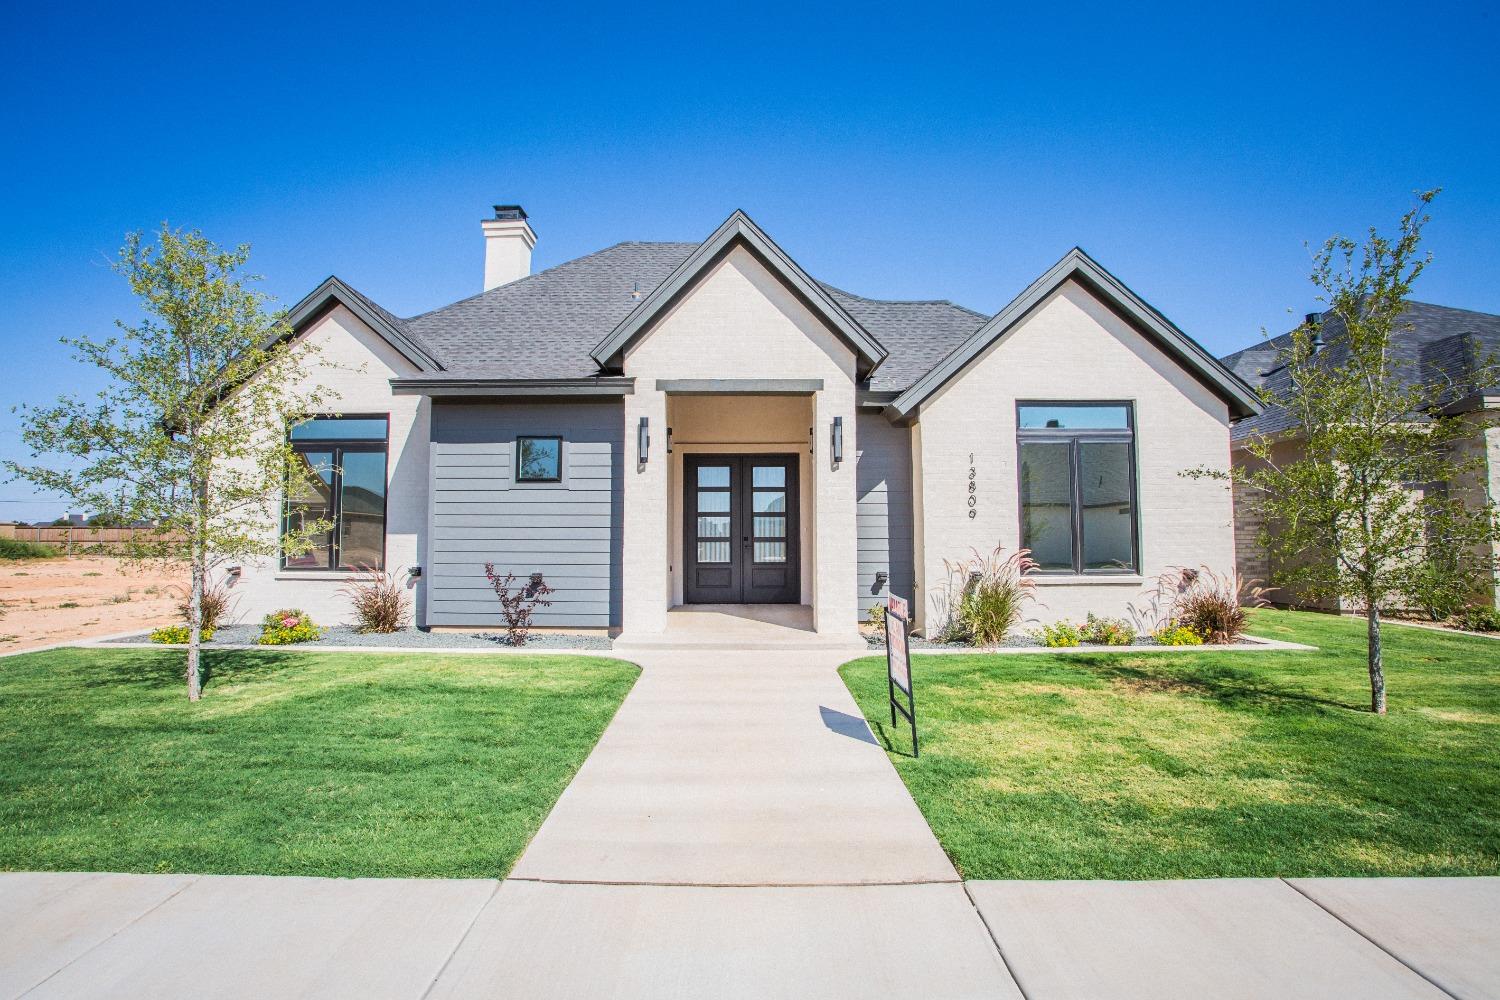 This immaculate new build in the Stratford Pointe just a short walk away from Lubbock's newest upscale Golf club Redfeather! Beautifully landscaped low maintenance backyard, enormous master walk-in closet, and an entryway that exudes opulence. This 3-bedroom,2.5-bath garden home brings the perfect living space for those who adore exquisite details. Boasting 2,554 square feet of spacious living including a gourmet kitchen for the pickiest of chefs. Entering through the charming French doors, you'll be captivated by the abundance of windows and high ceilings that flood the home with natural light throughout the open and airy layout; stunning luxury vinyl plank floors highlight stone accents and blend charmingly with the soft white and grey tones found through the home. This masterful design uniquely embodies both luxury with clean neutral colors and elegant accents while embracing highly sought-after modern features. You have found your new home in one of Lubbock's newest subdivision.